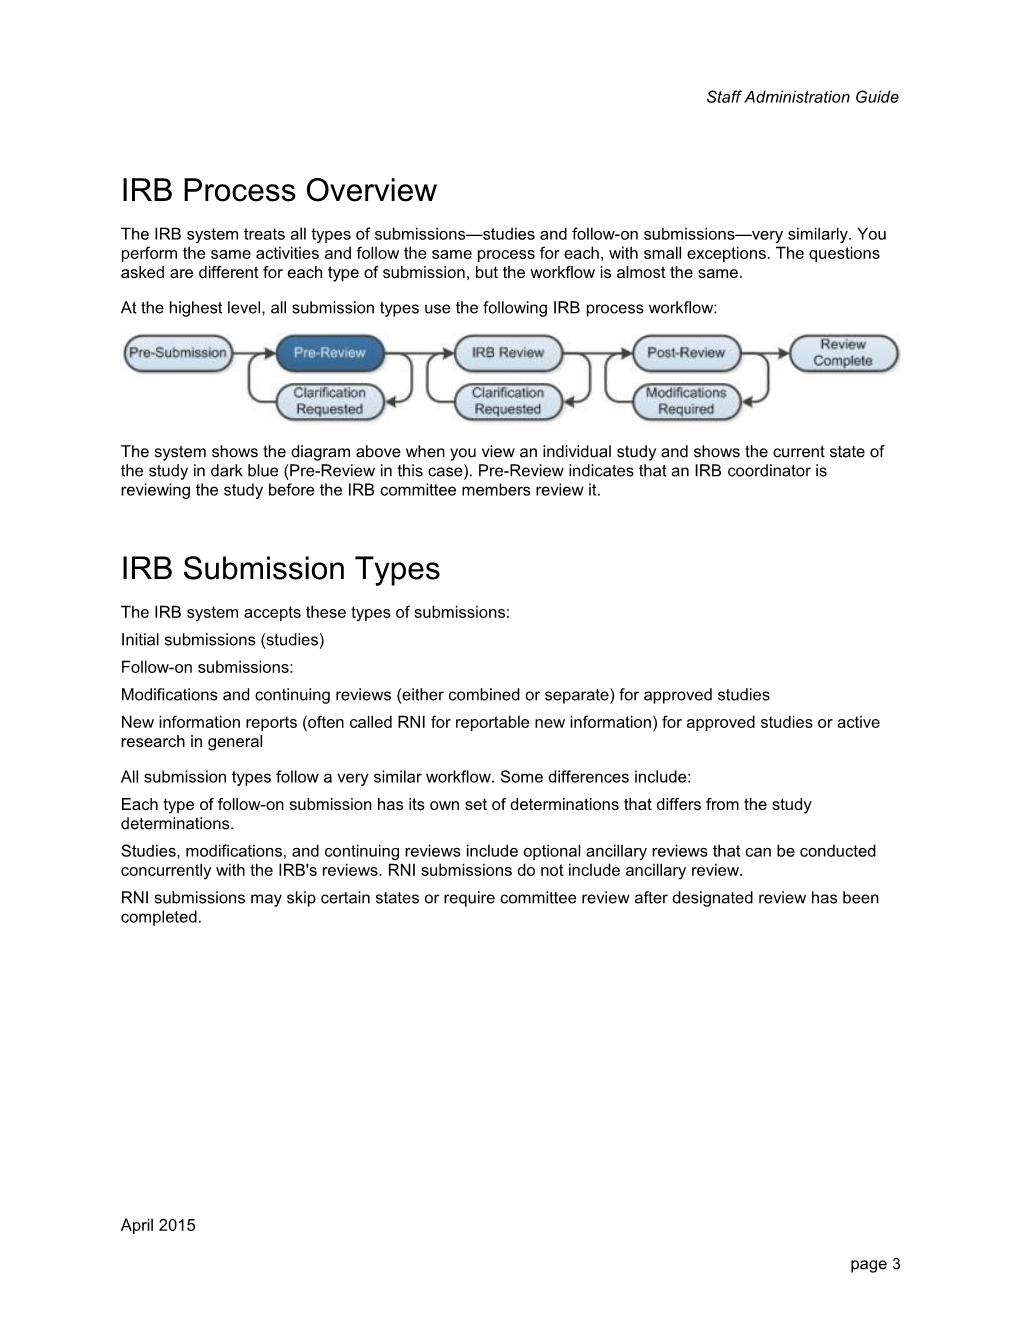 IRB Staff Administration Guide